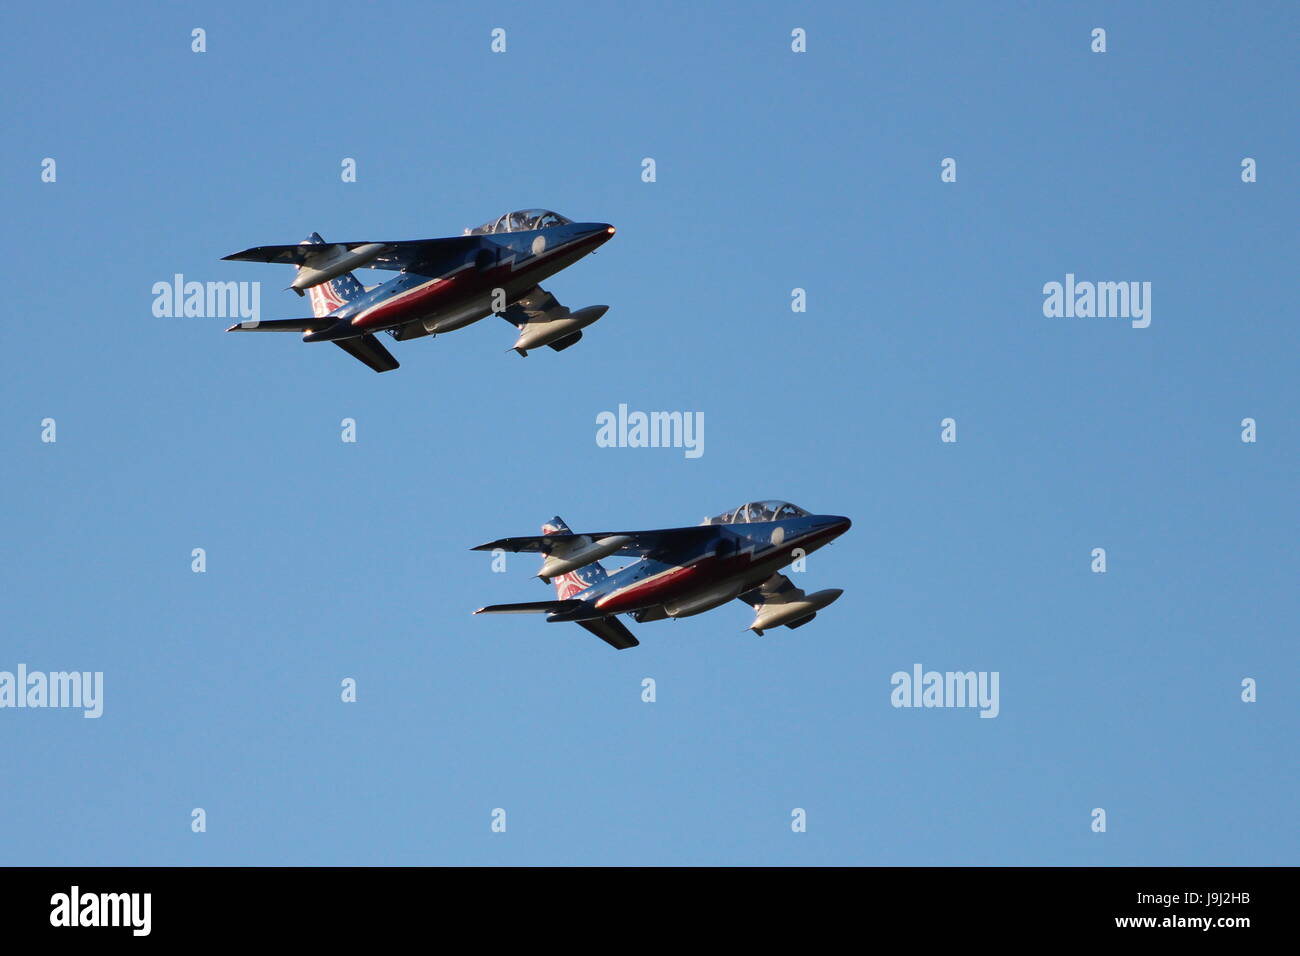 Dassault-Breguet/Dornier Alpha Jet Es of the French Air Force's aerobatic team, the Patrouille de France, arriving at Prestwick Airport in Ayrshire. Stock Photo